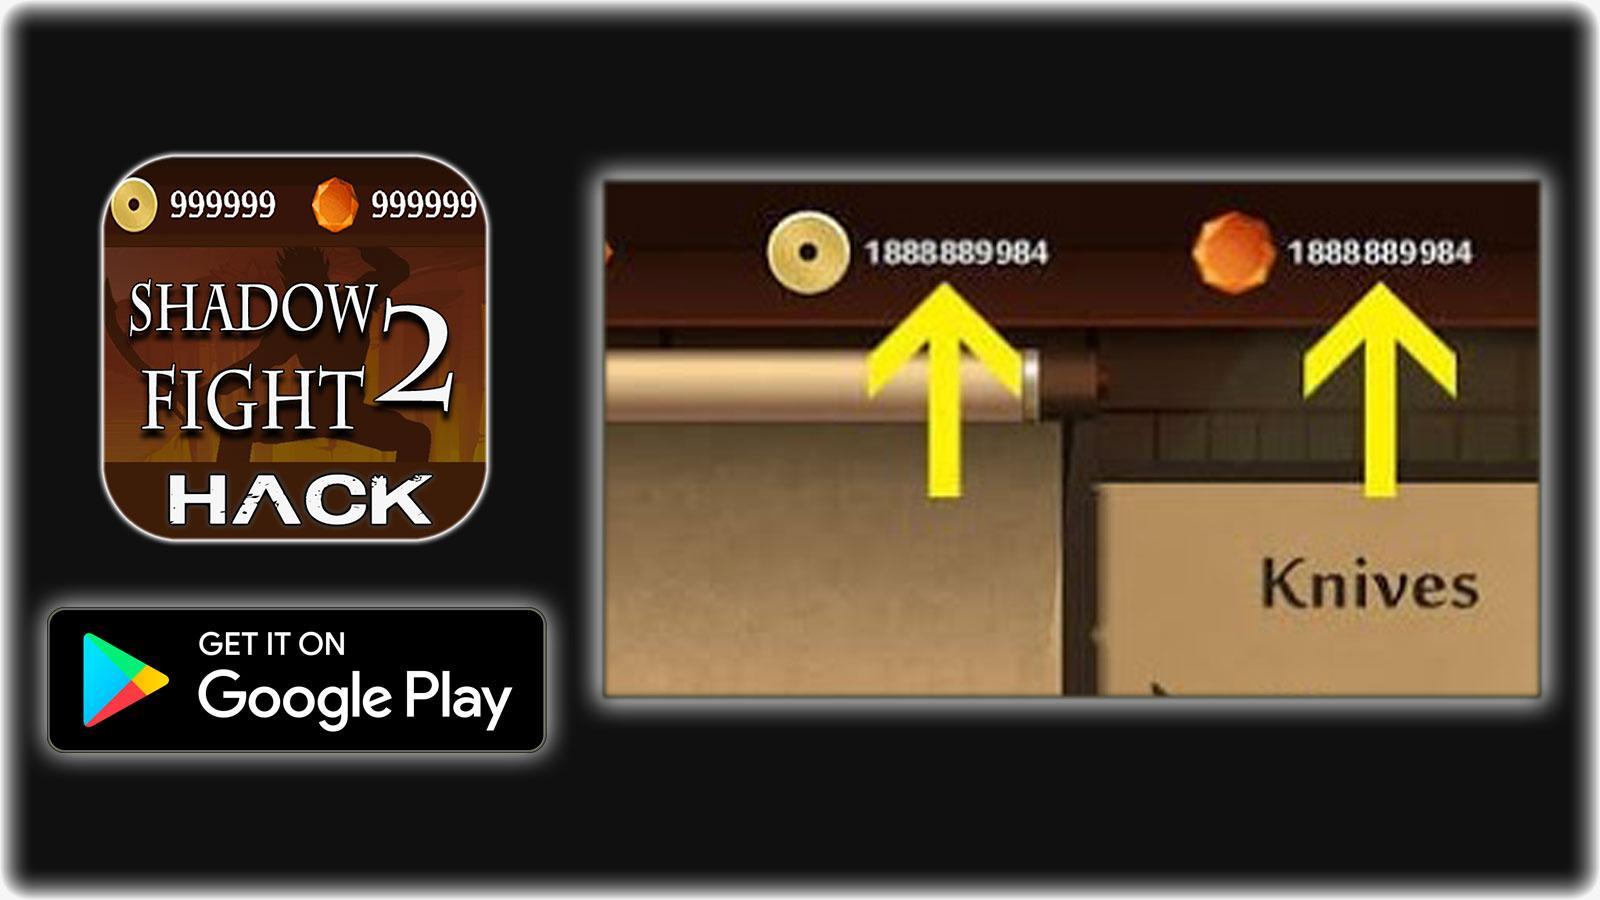 Hack For Shadow Fight 2 Cheats New Prank! for Android - APK Download